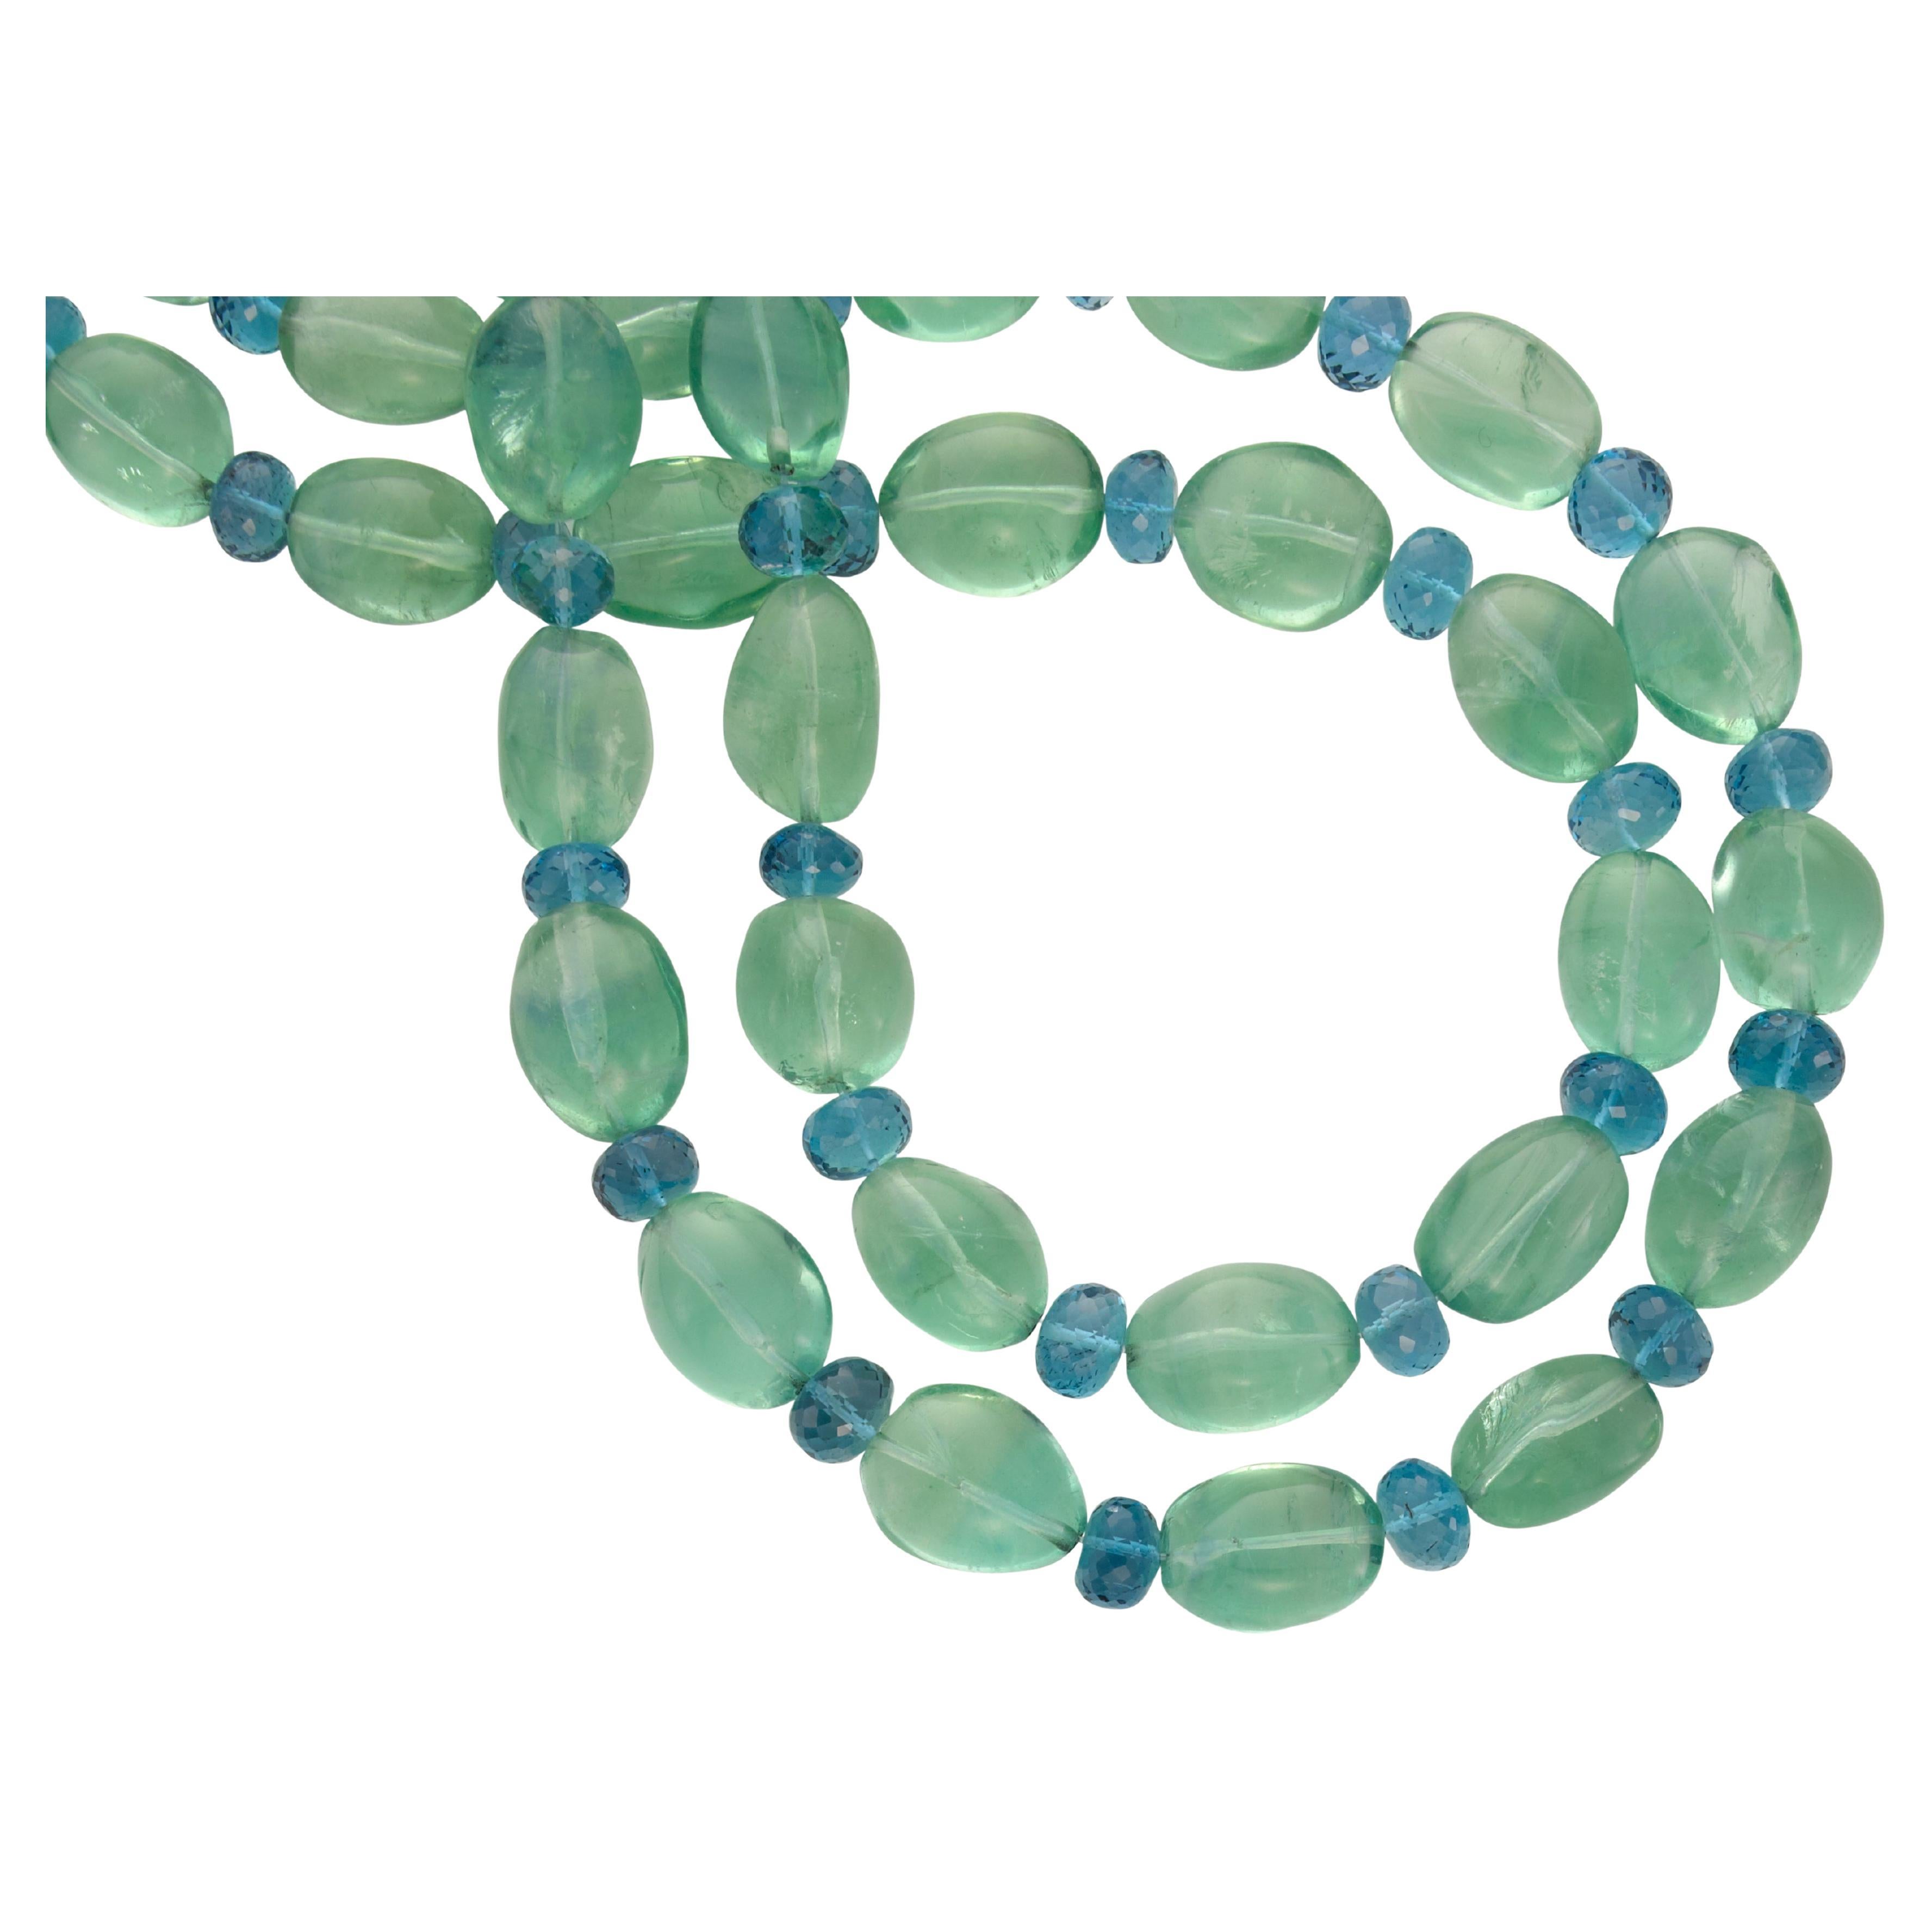 Sorab & Roshi Fluorite Bead Necklace with Faceted Blue Topaz Bead Accent For Sale